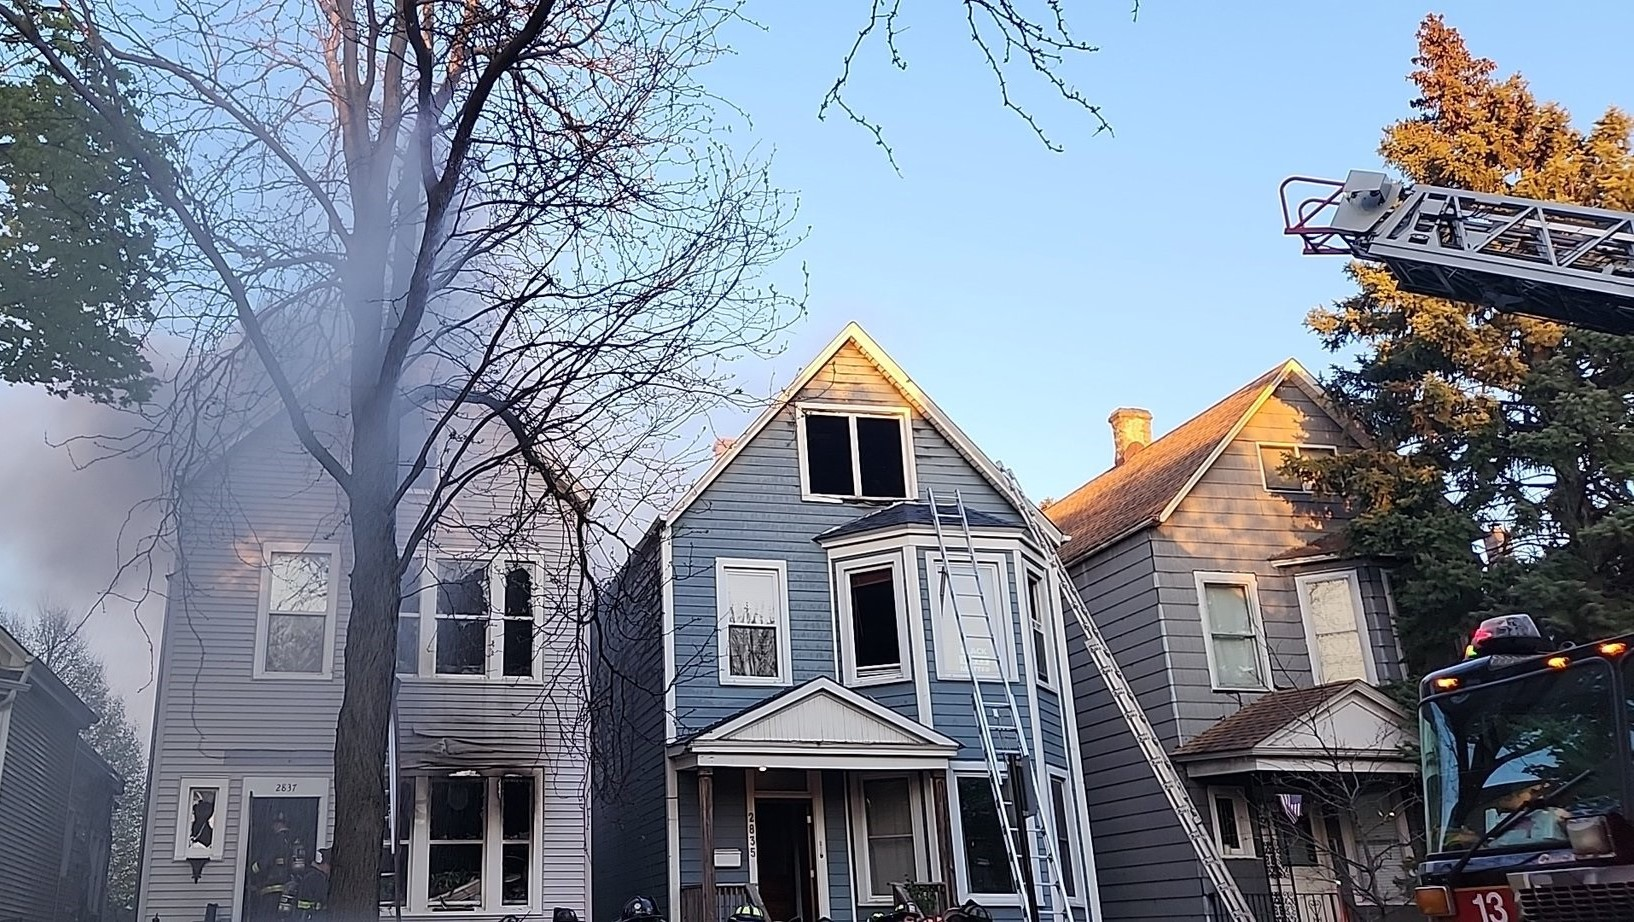 Firefighters put out large blaze at three homes in Logan Square